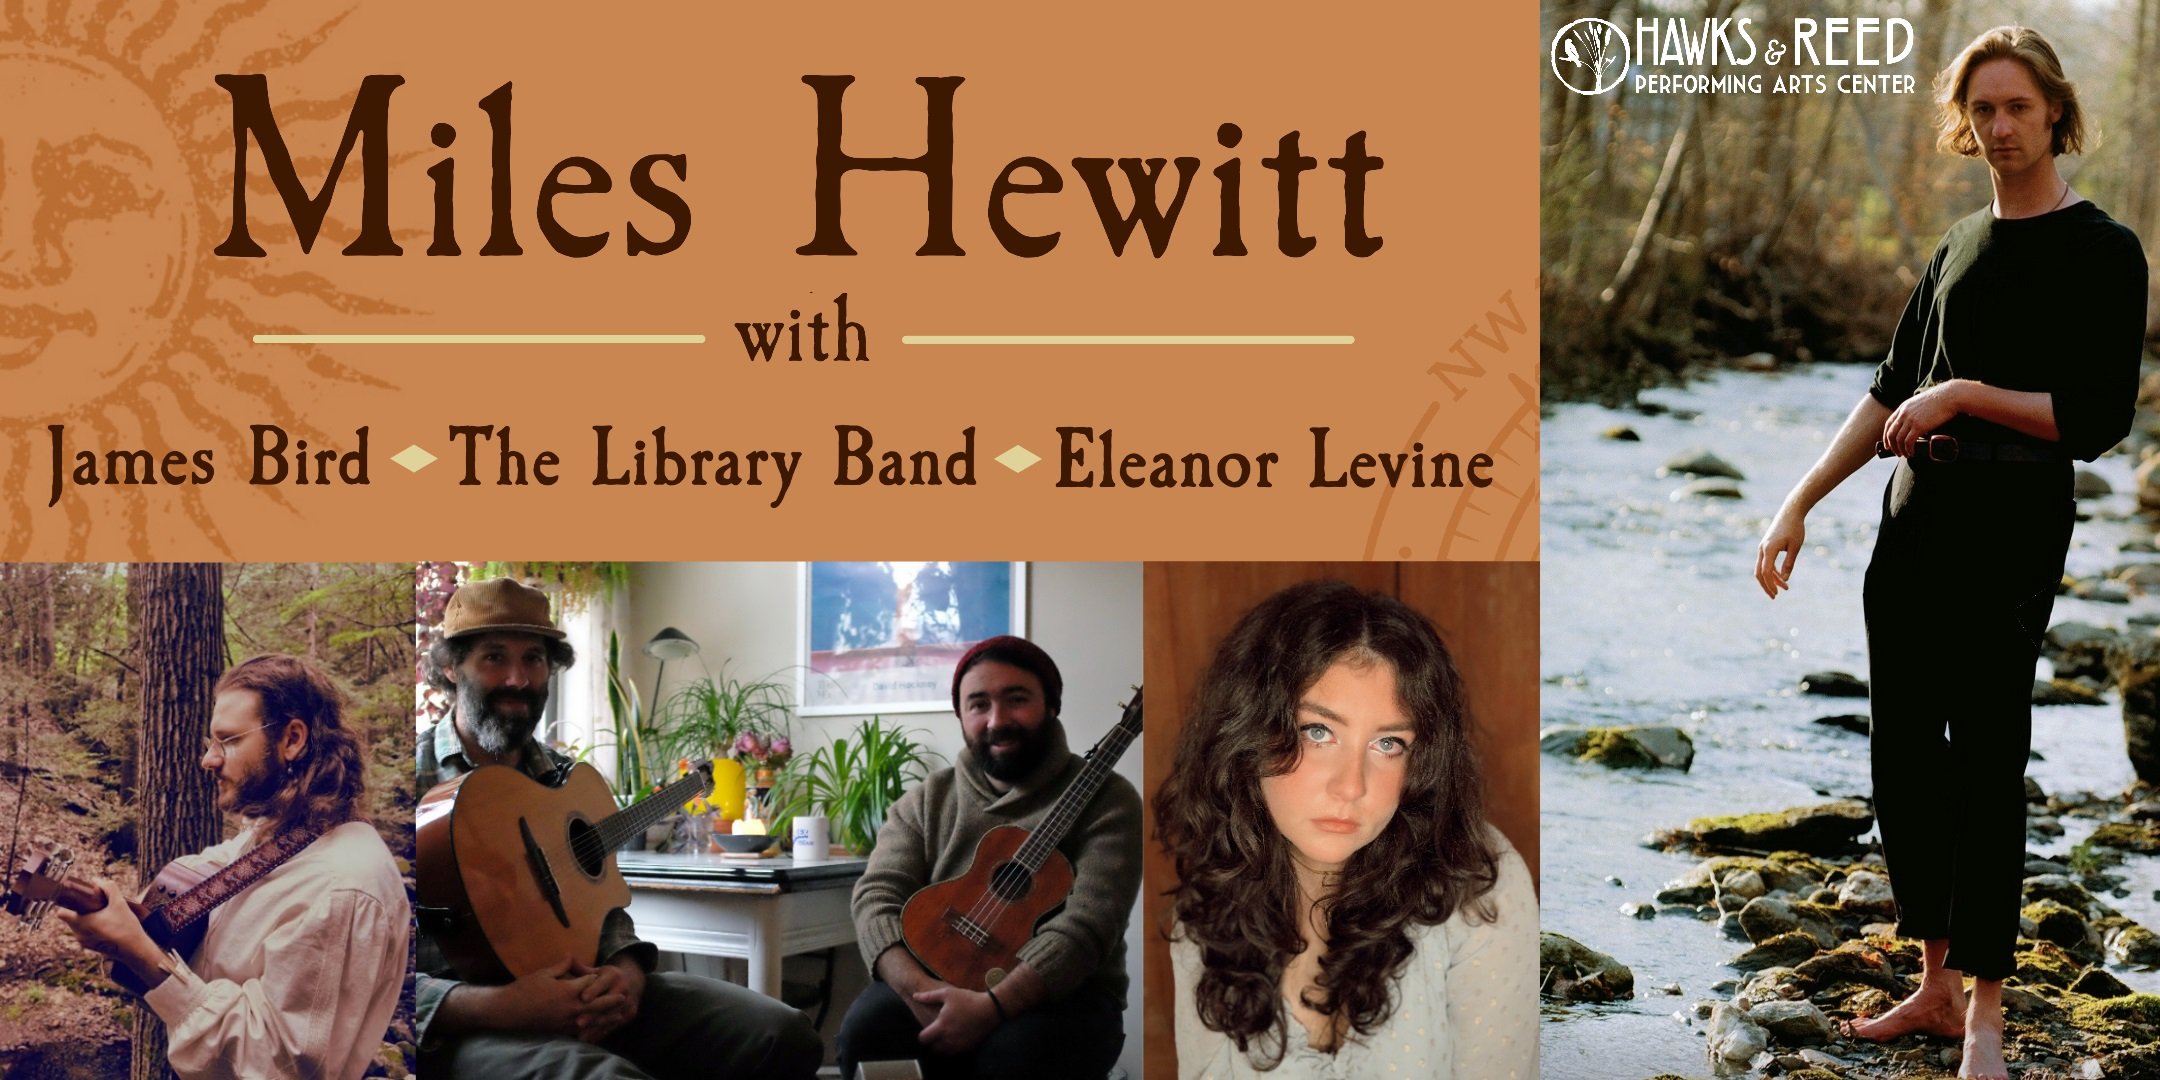 Miles Hewitt with Eleanor Levine, James Bird, and The Library Band